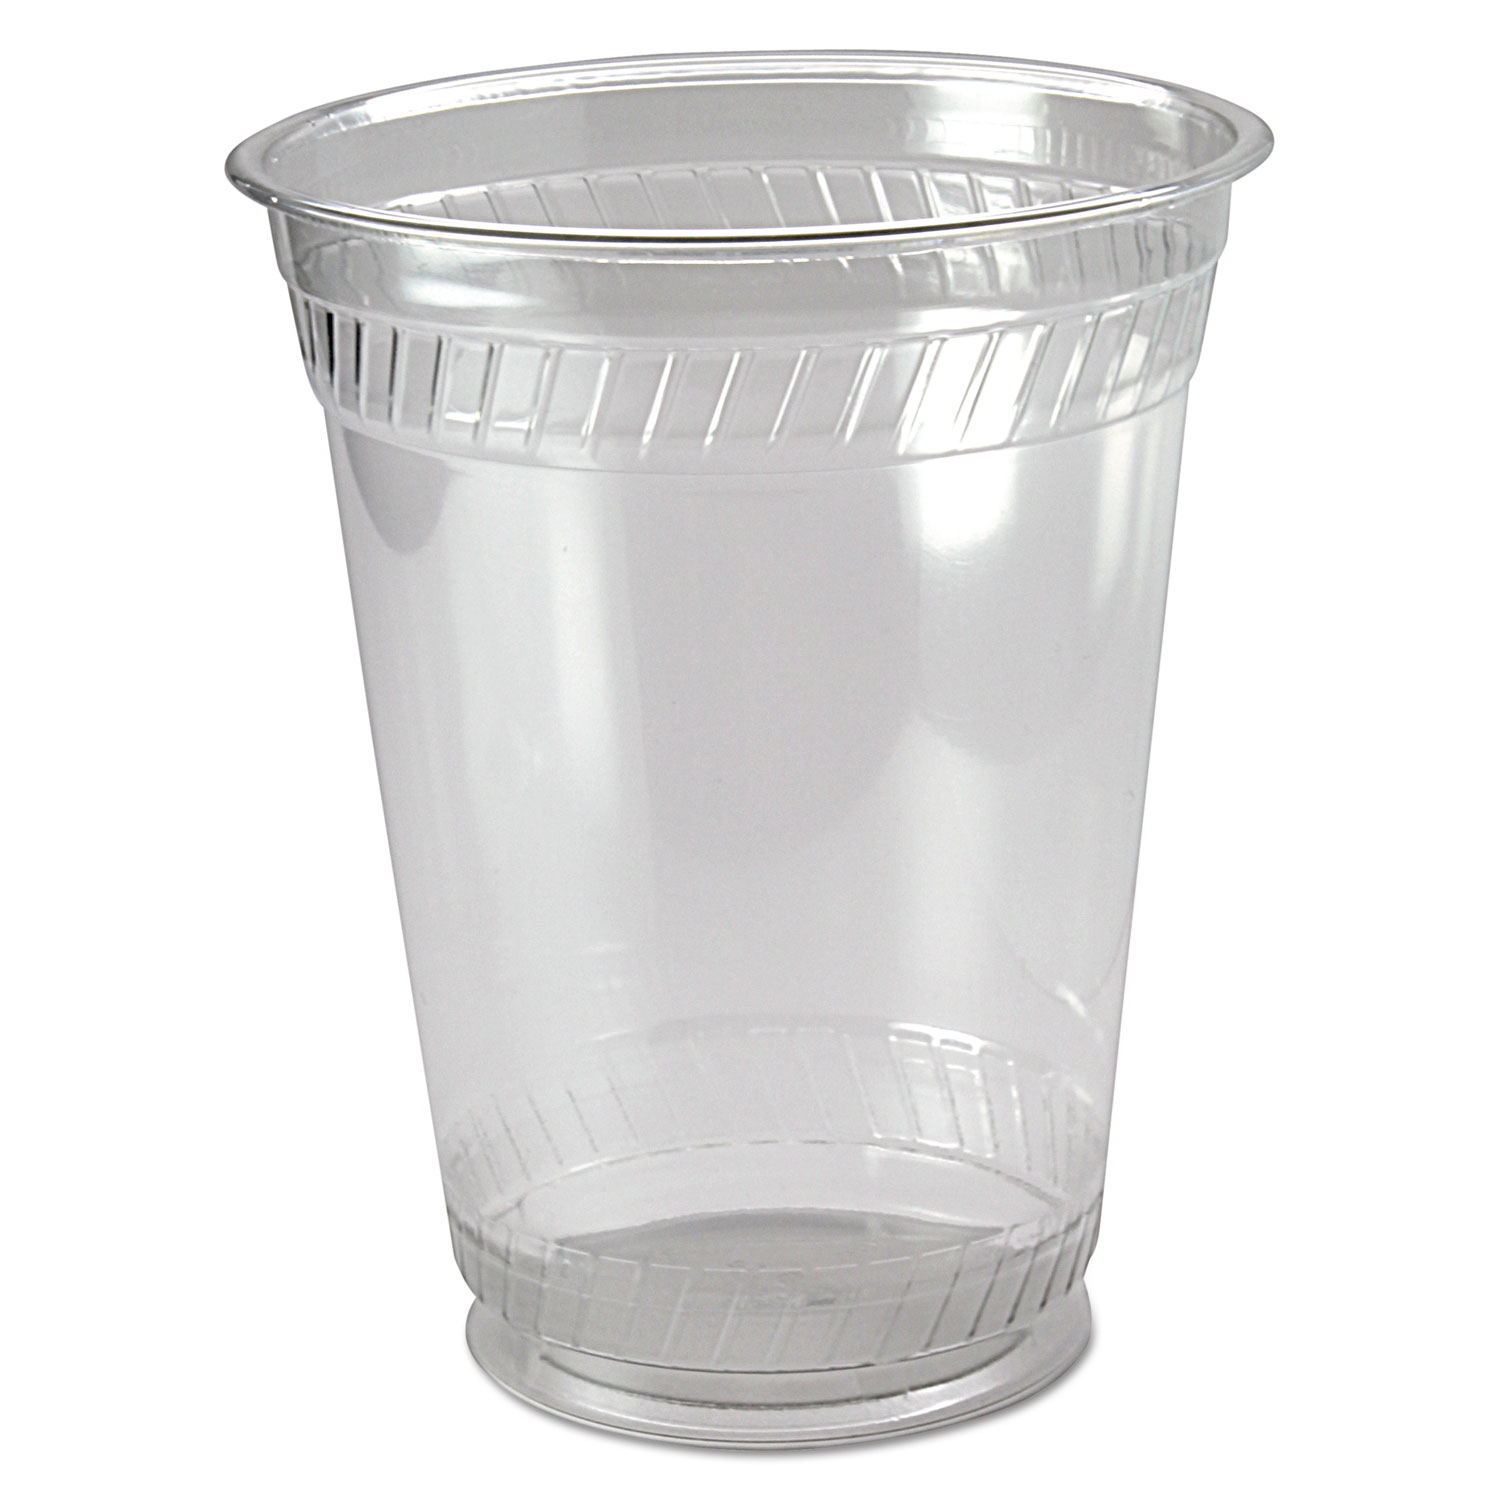  Fabri-Kal 9509106 Greenware Cold Drink Cups, 16oz, Clear, 50/Sleeve, 20 Sleeves/Carton (FABGC16S) 